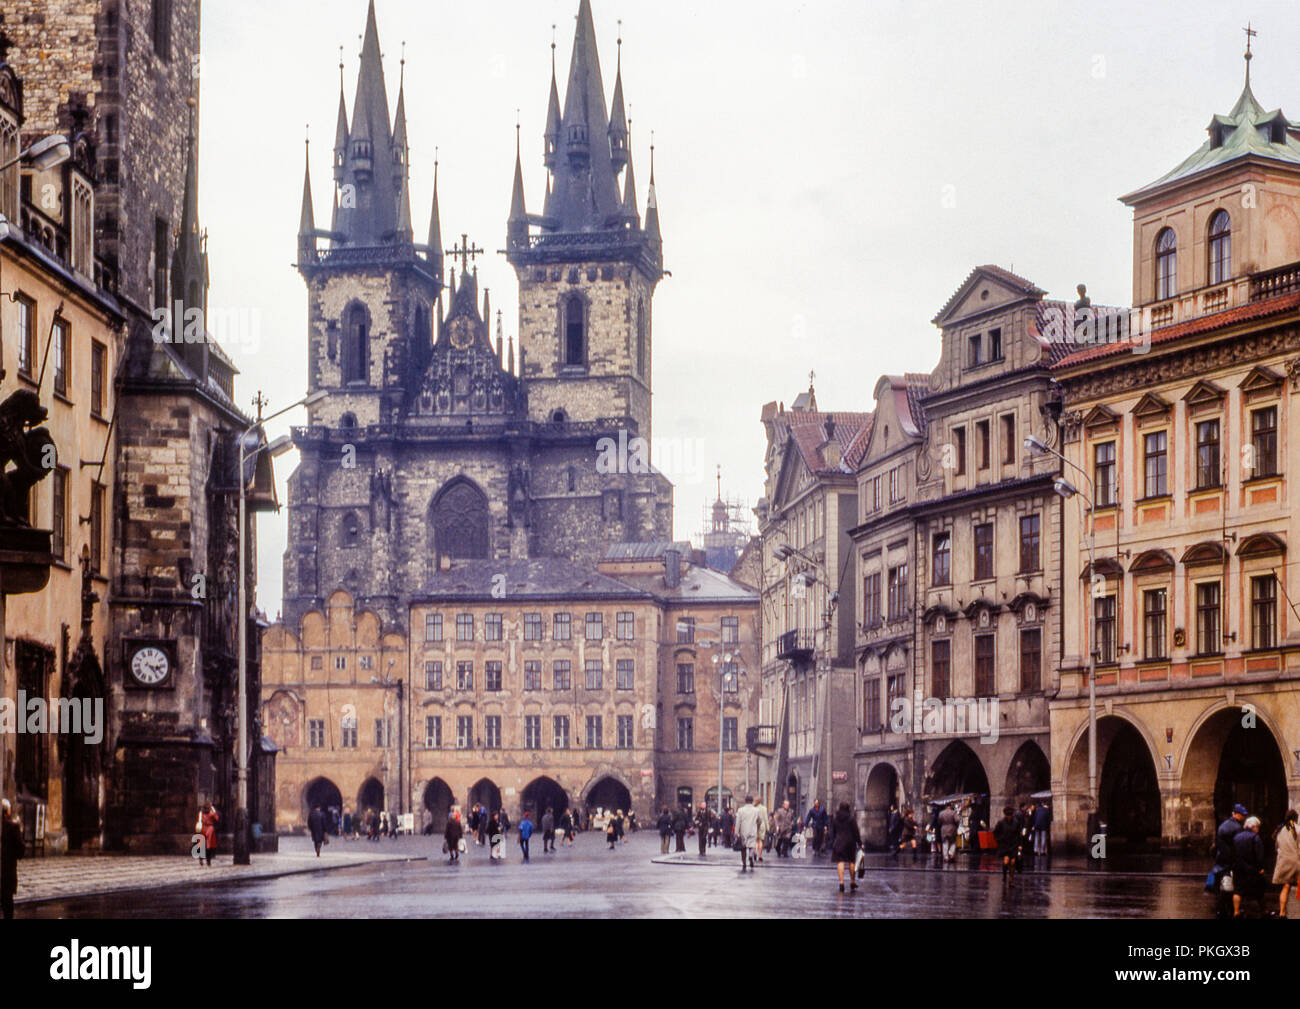 Church of Our Lady before Týn and Old Town Hall, on Old town Square, Prague taken in April 1973 in the former Czechoslovakia. Original Archive Image. Stock Photo